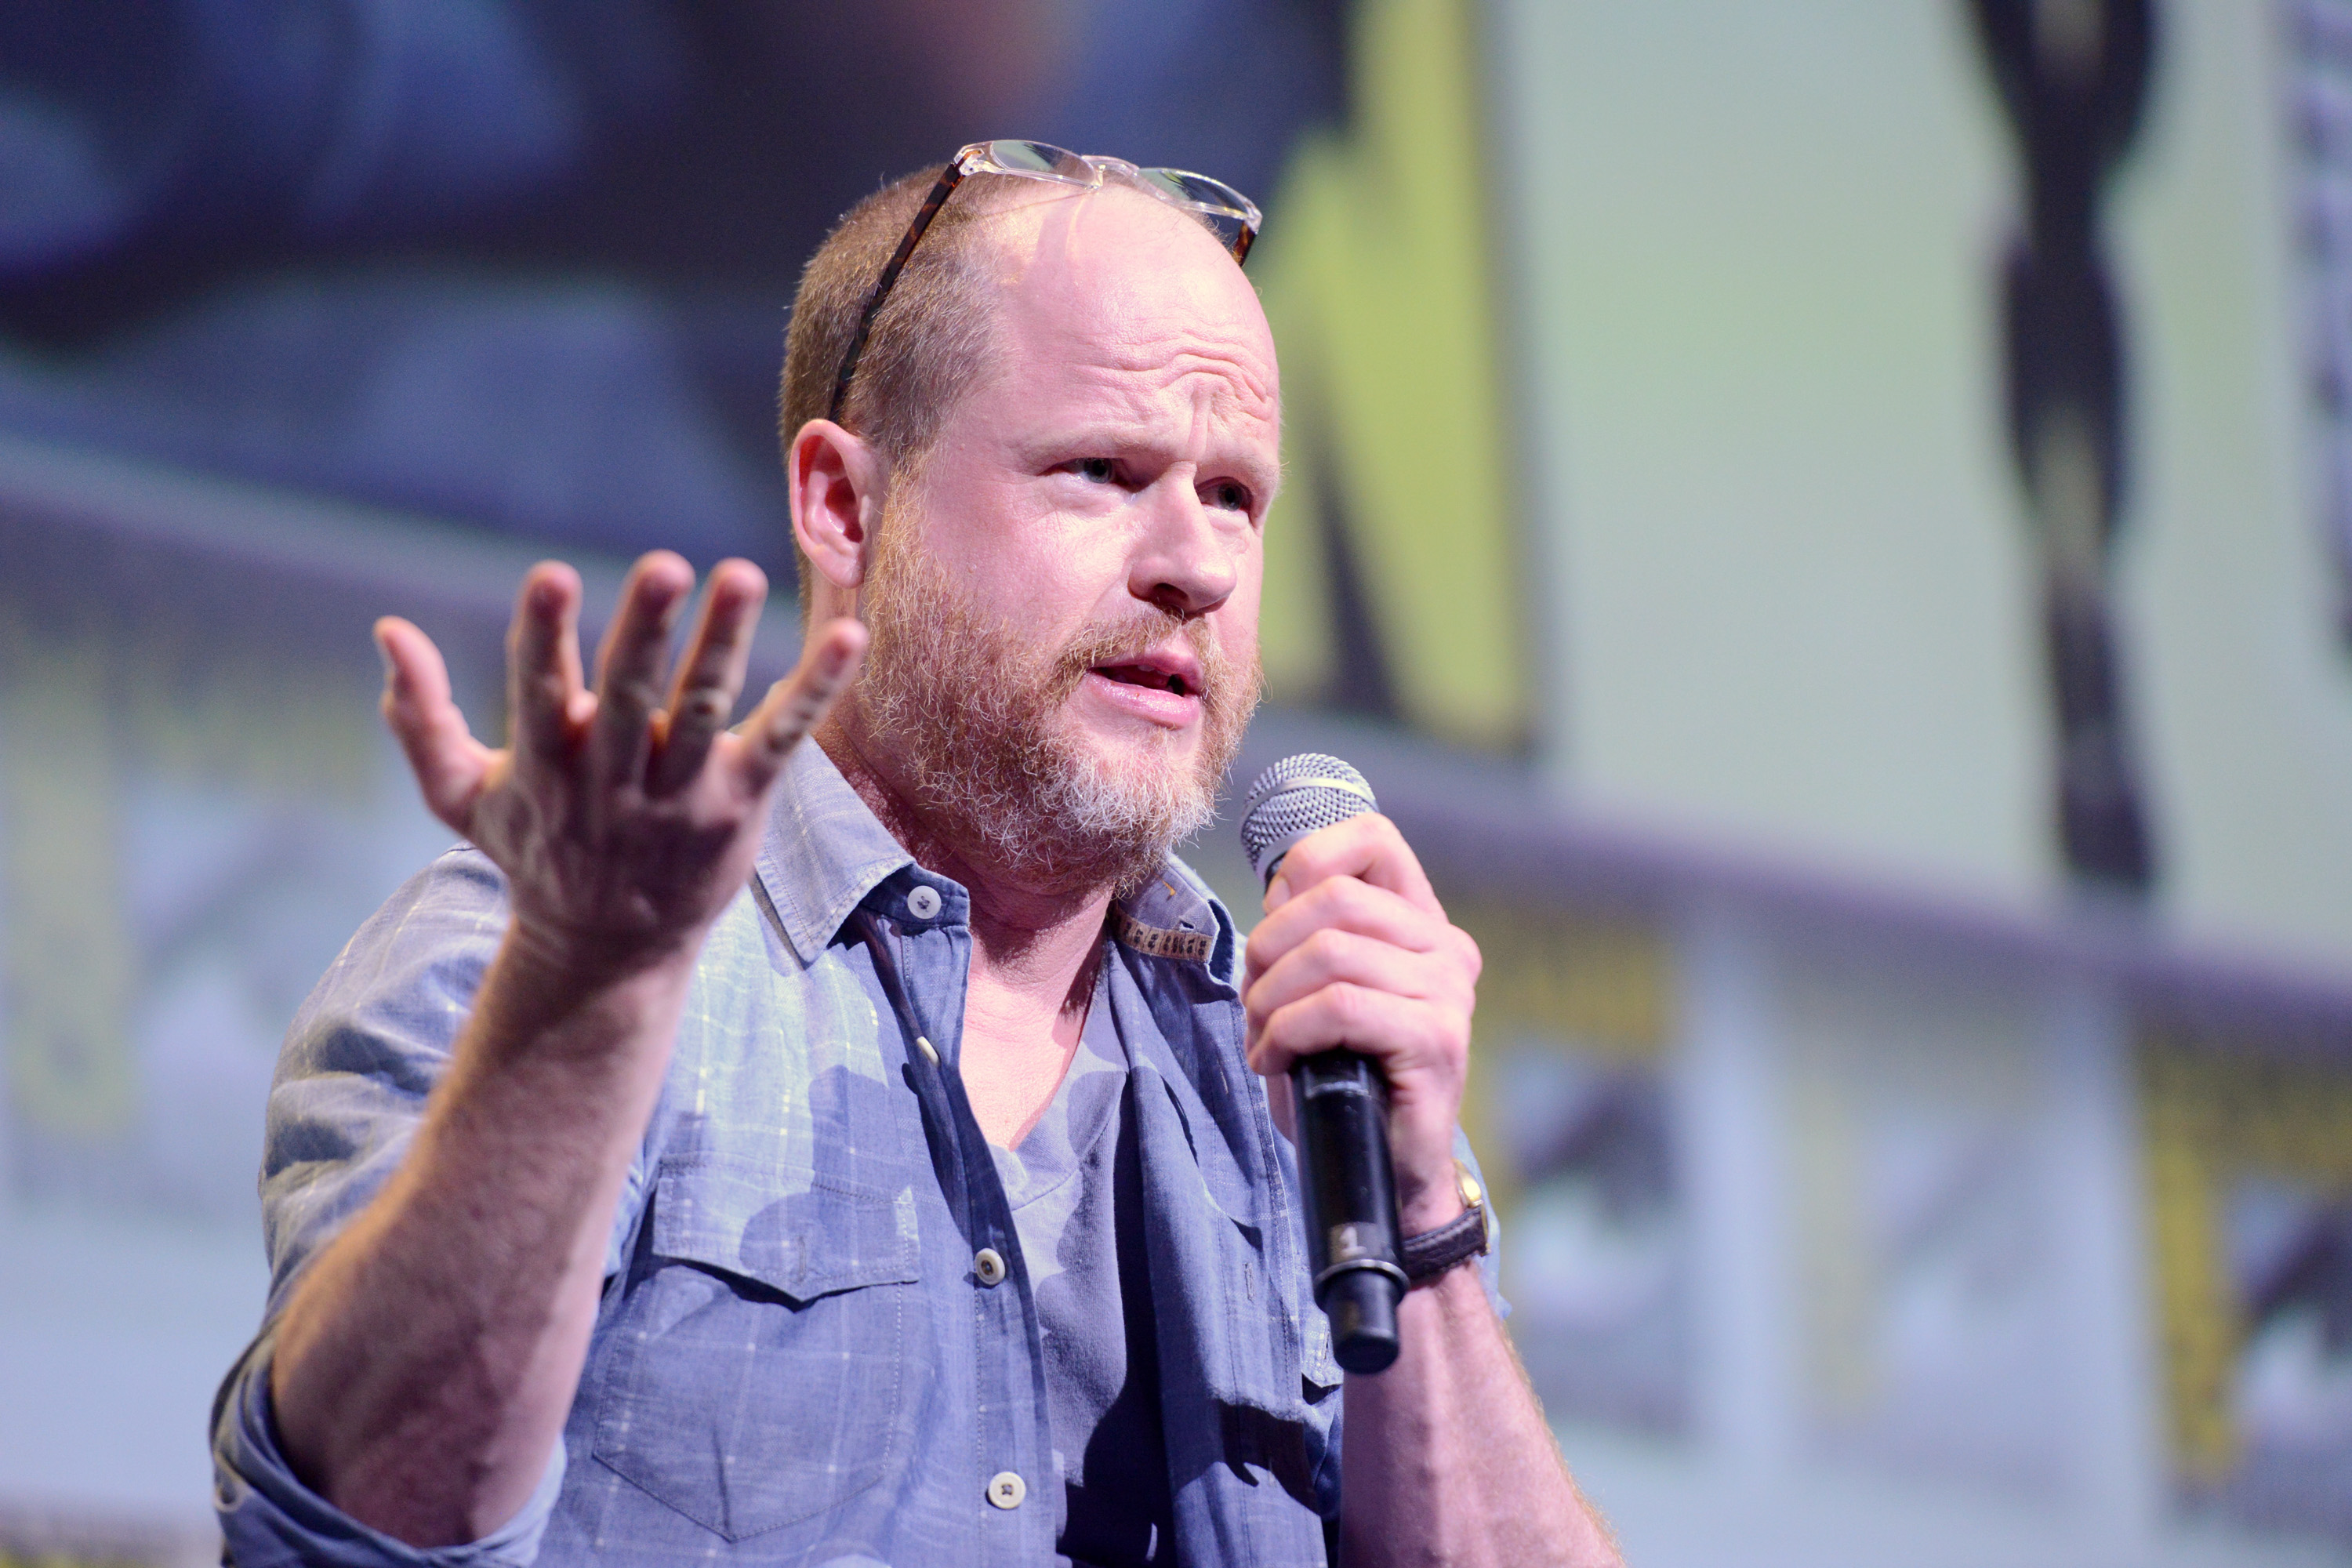 Writer/director Joss Whedon attends Dark Horse: Conversations With Joss Whedon during Comic-Con International 2016 at San Diego Convention Center on July 22, 2016 in San Diego, California. (Photo by Albert L. Ortega/Getty Images) (Albert L. Ortega—Getty Images)